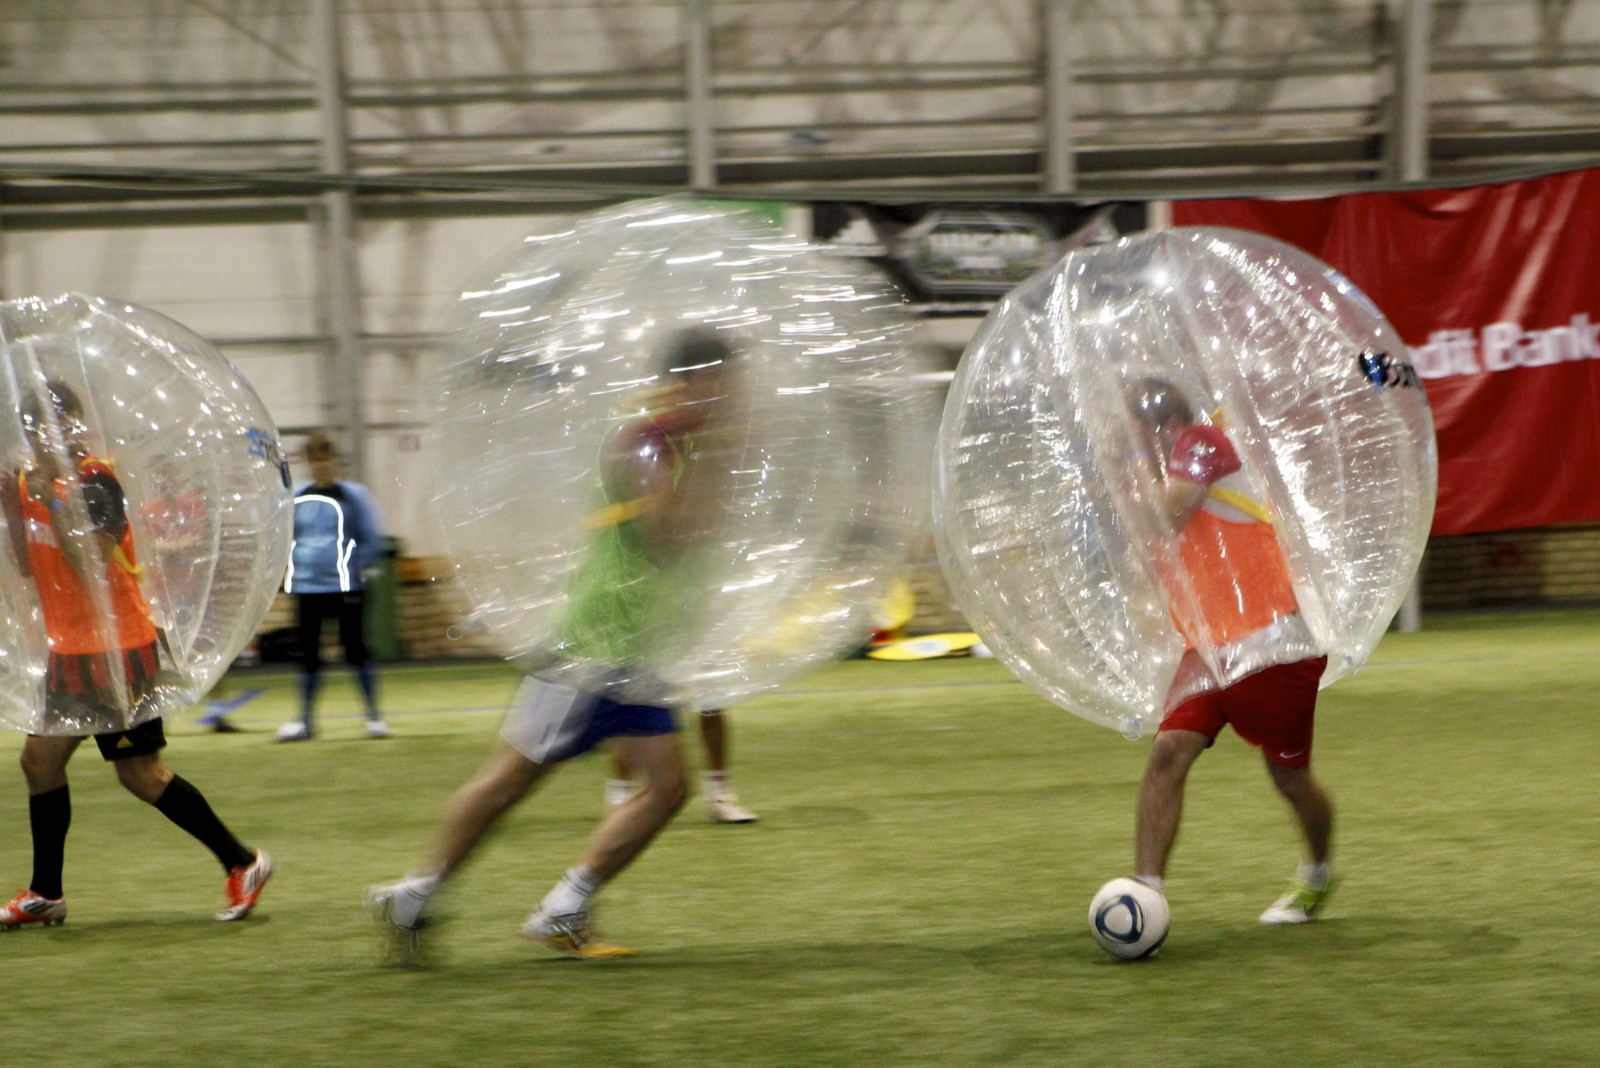 Zorb Football  The ultimate fun team game, bounce around and kick a 